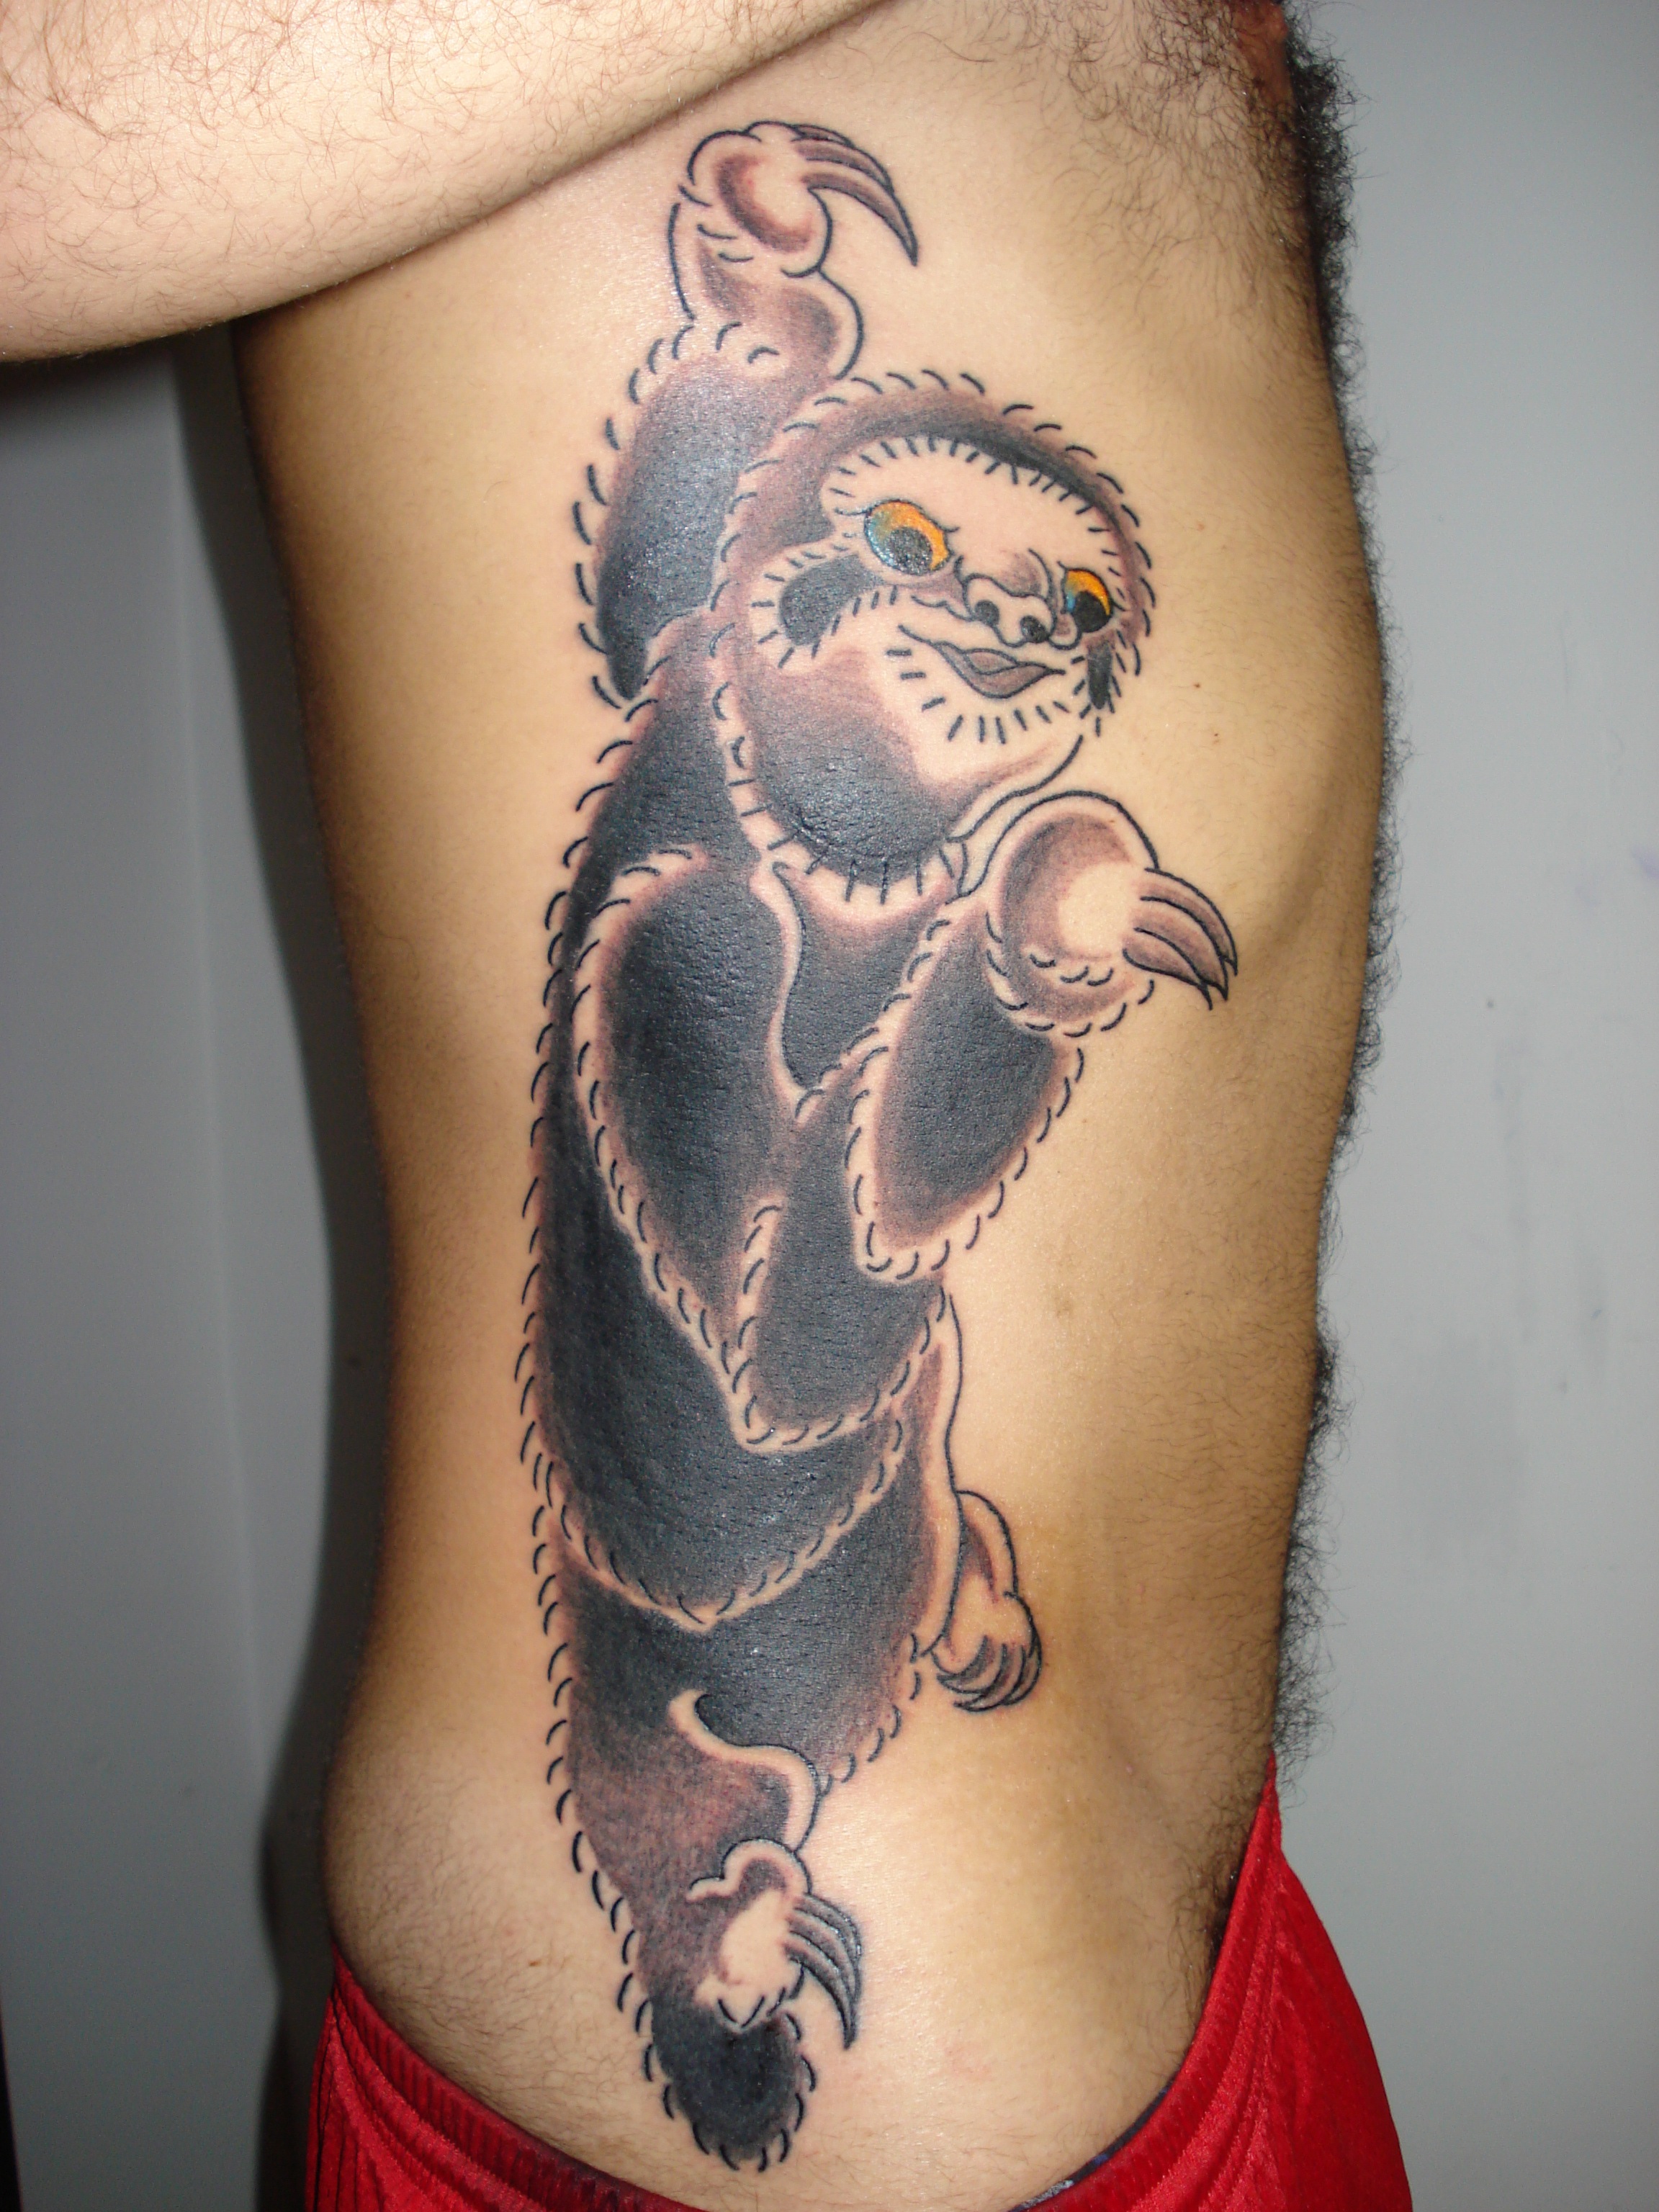 Hipster Tattoos  Designs  Ideas  and Meaning Tattoos  For You